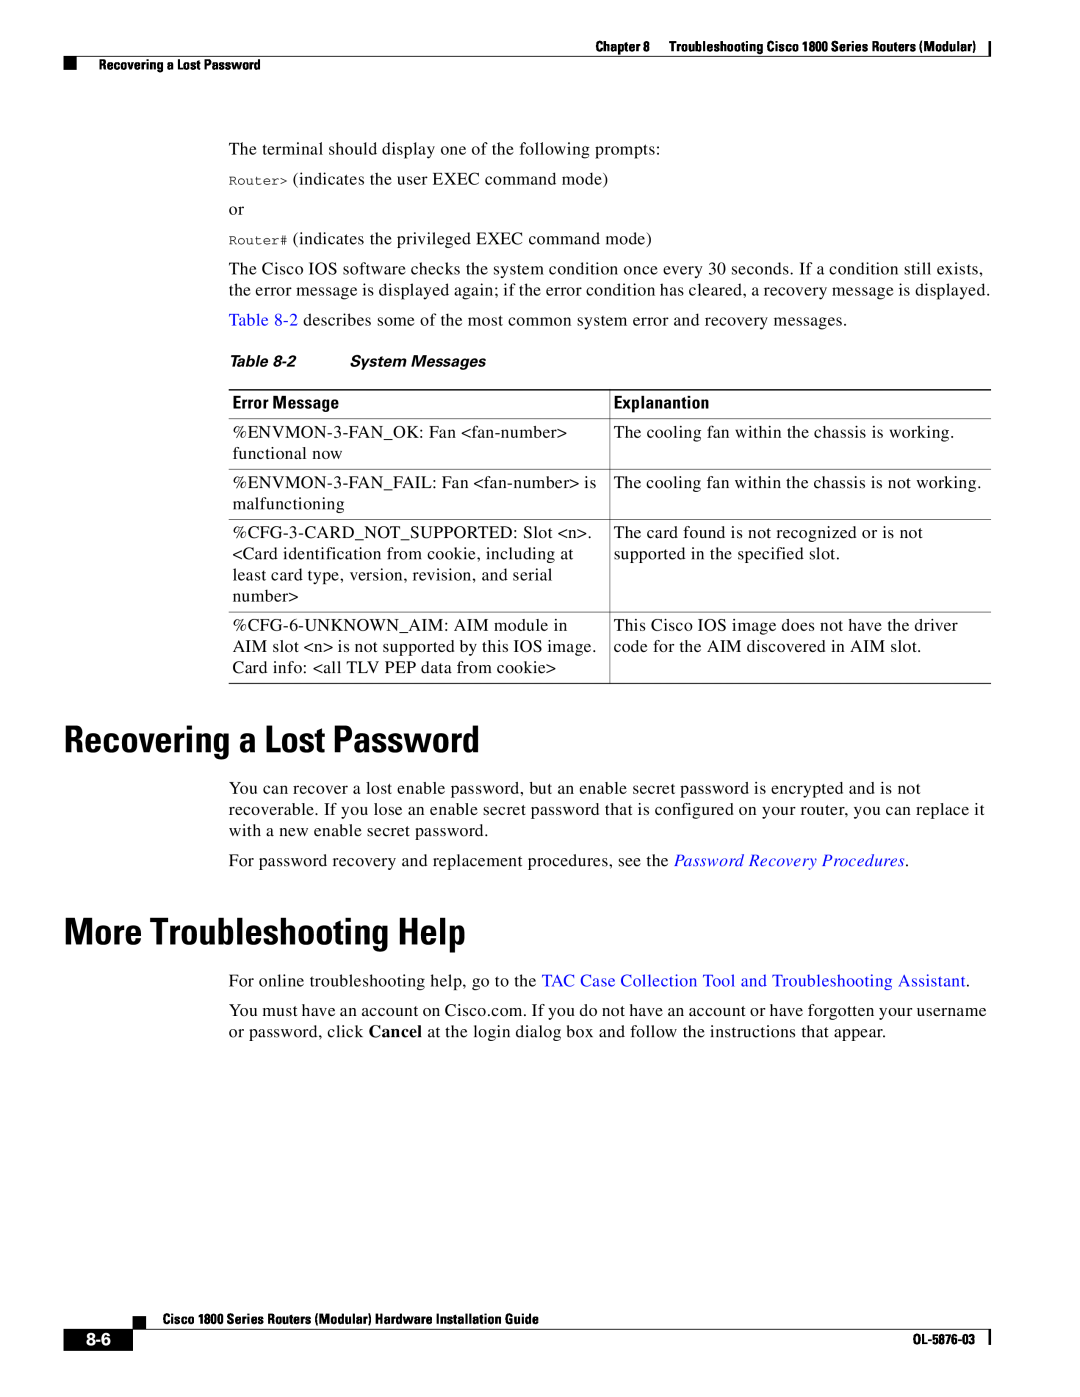 Cisco Systems CISCO1841-HSEC/K9-RF manual Recovering a Lost Password, More Troubleshooting Help, Explanantion 